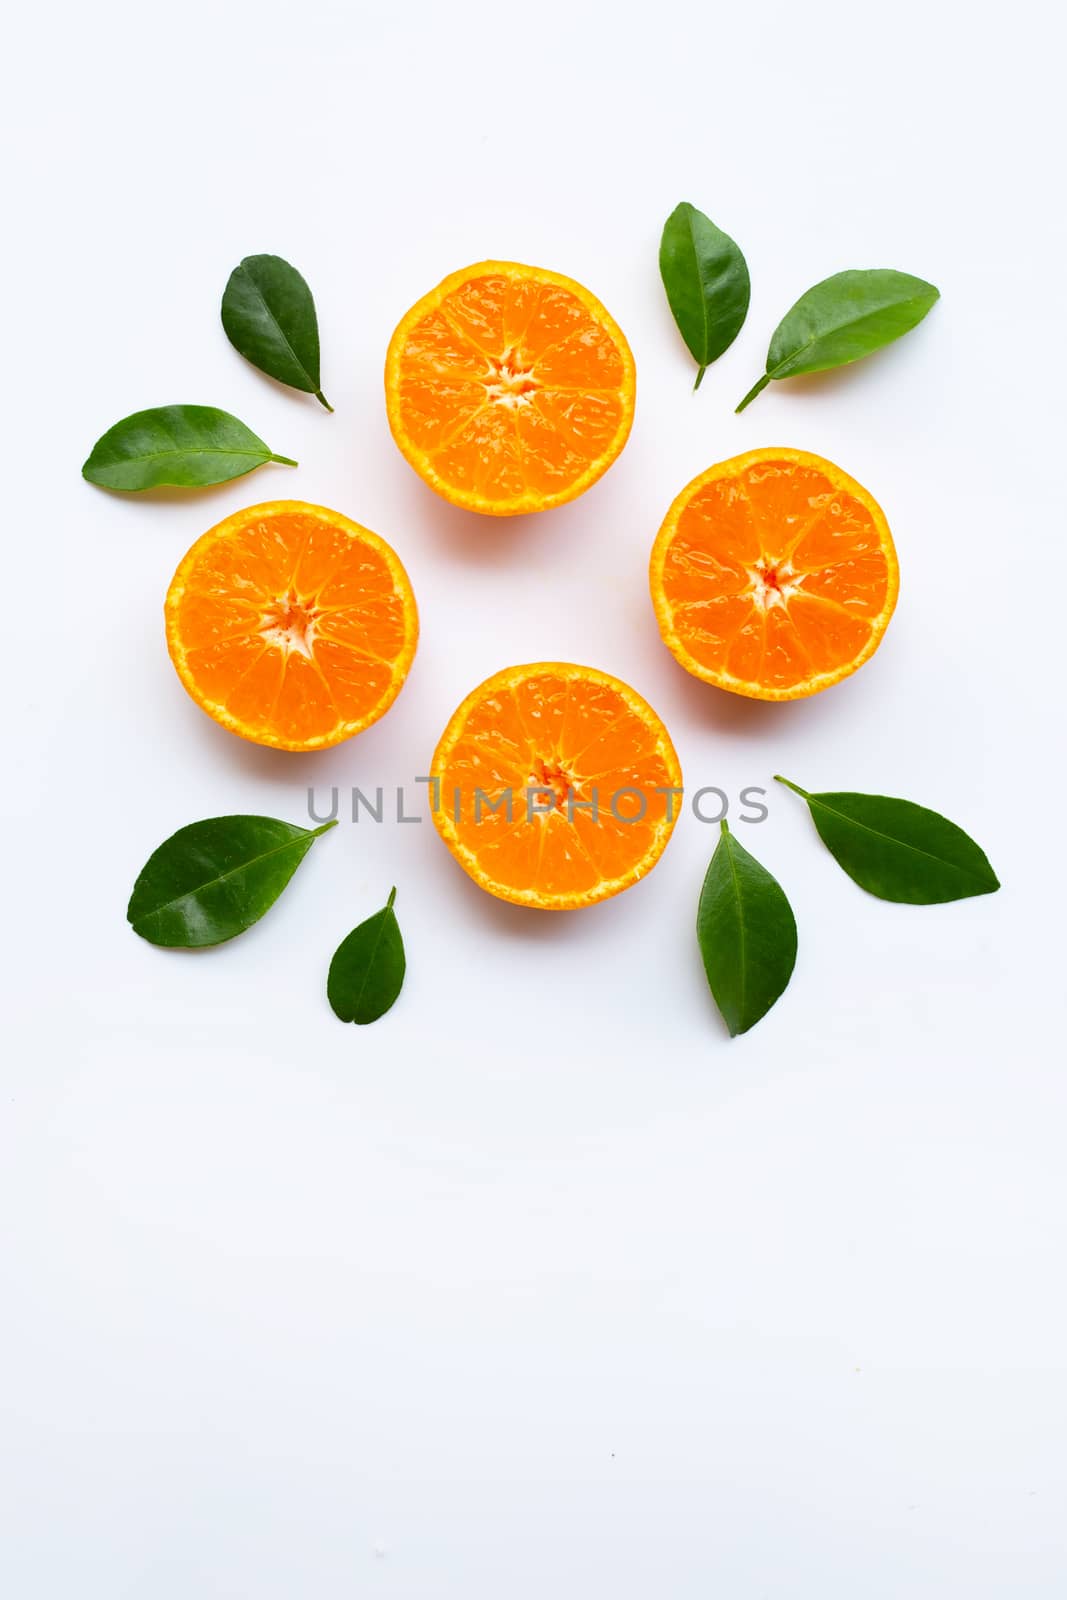 Orange fruits with  leaves on white background.  by Bowonpat